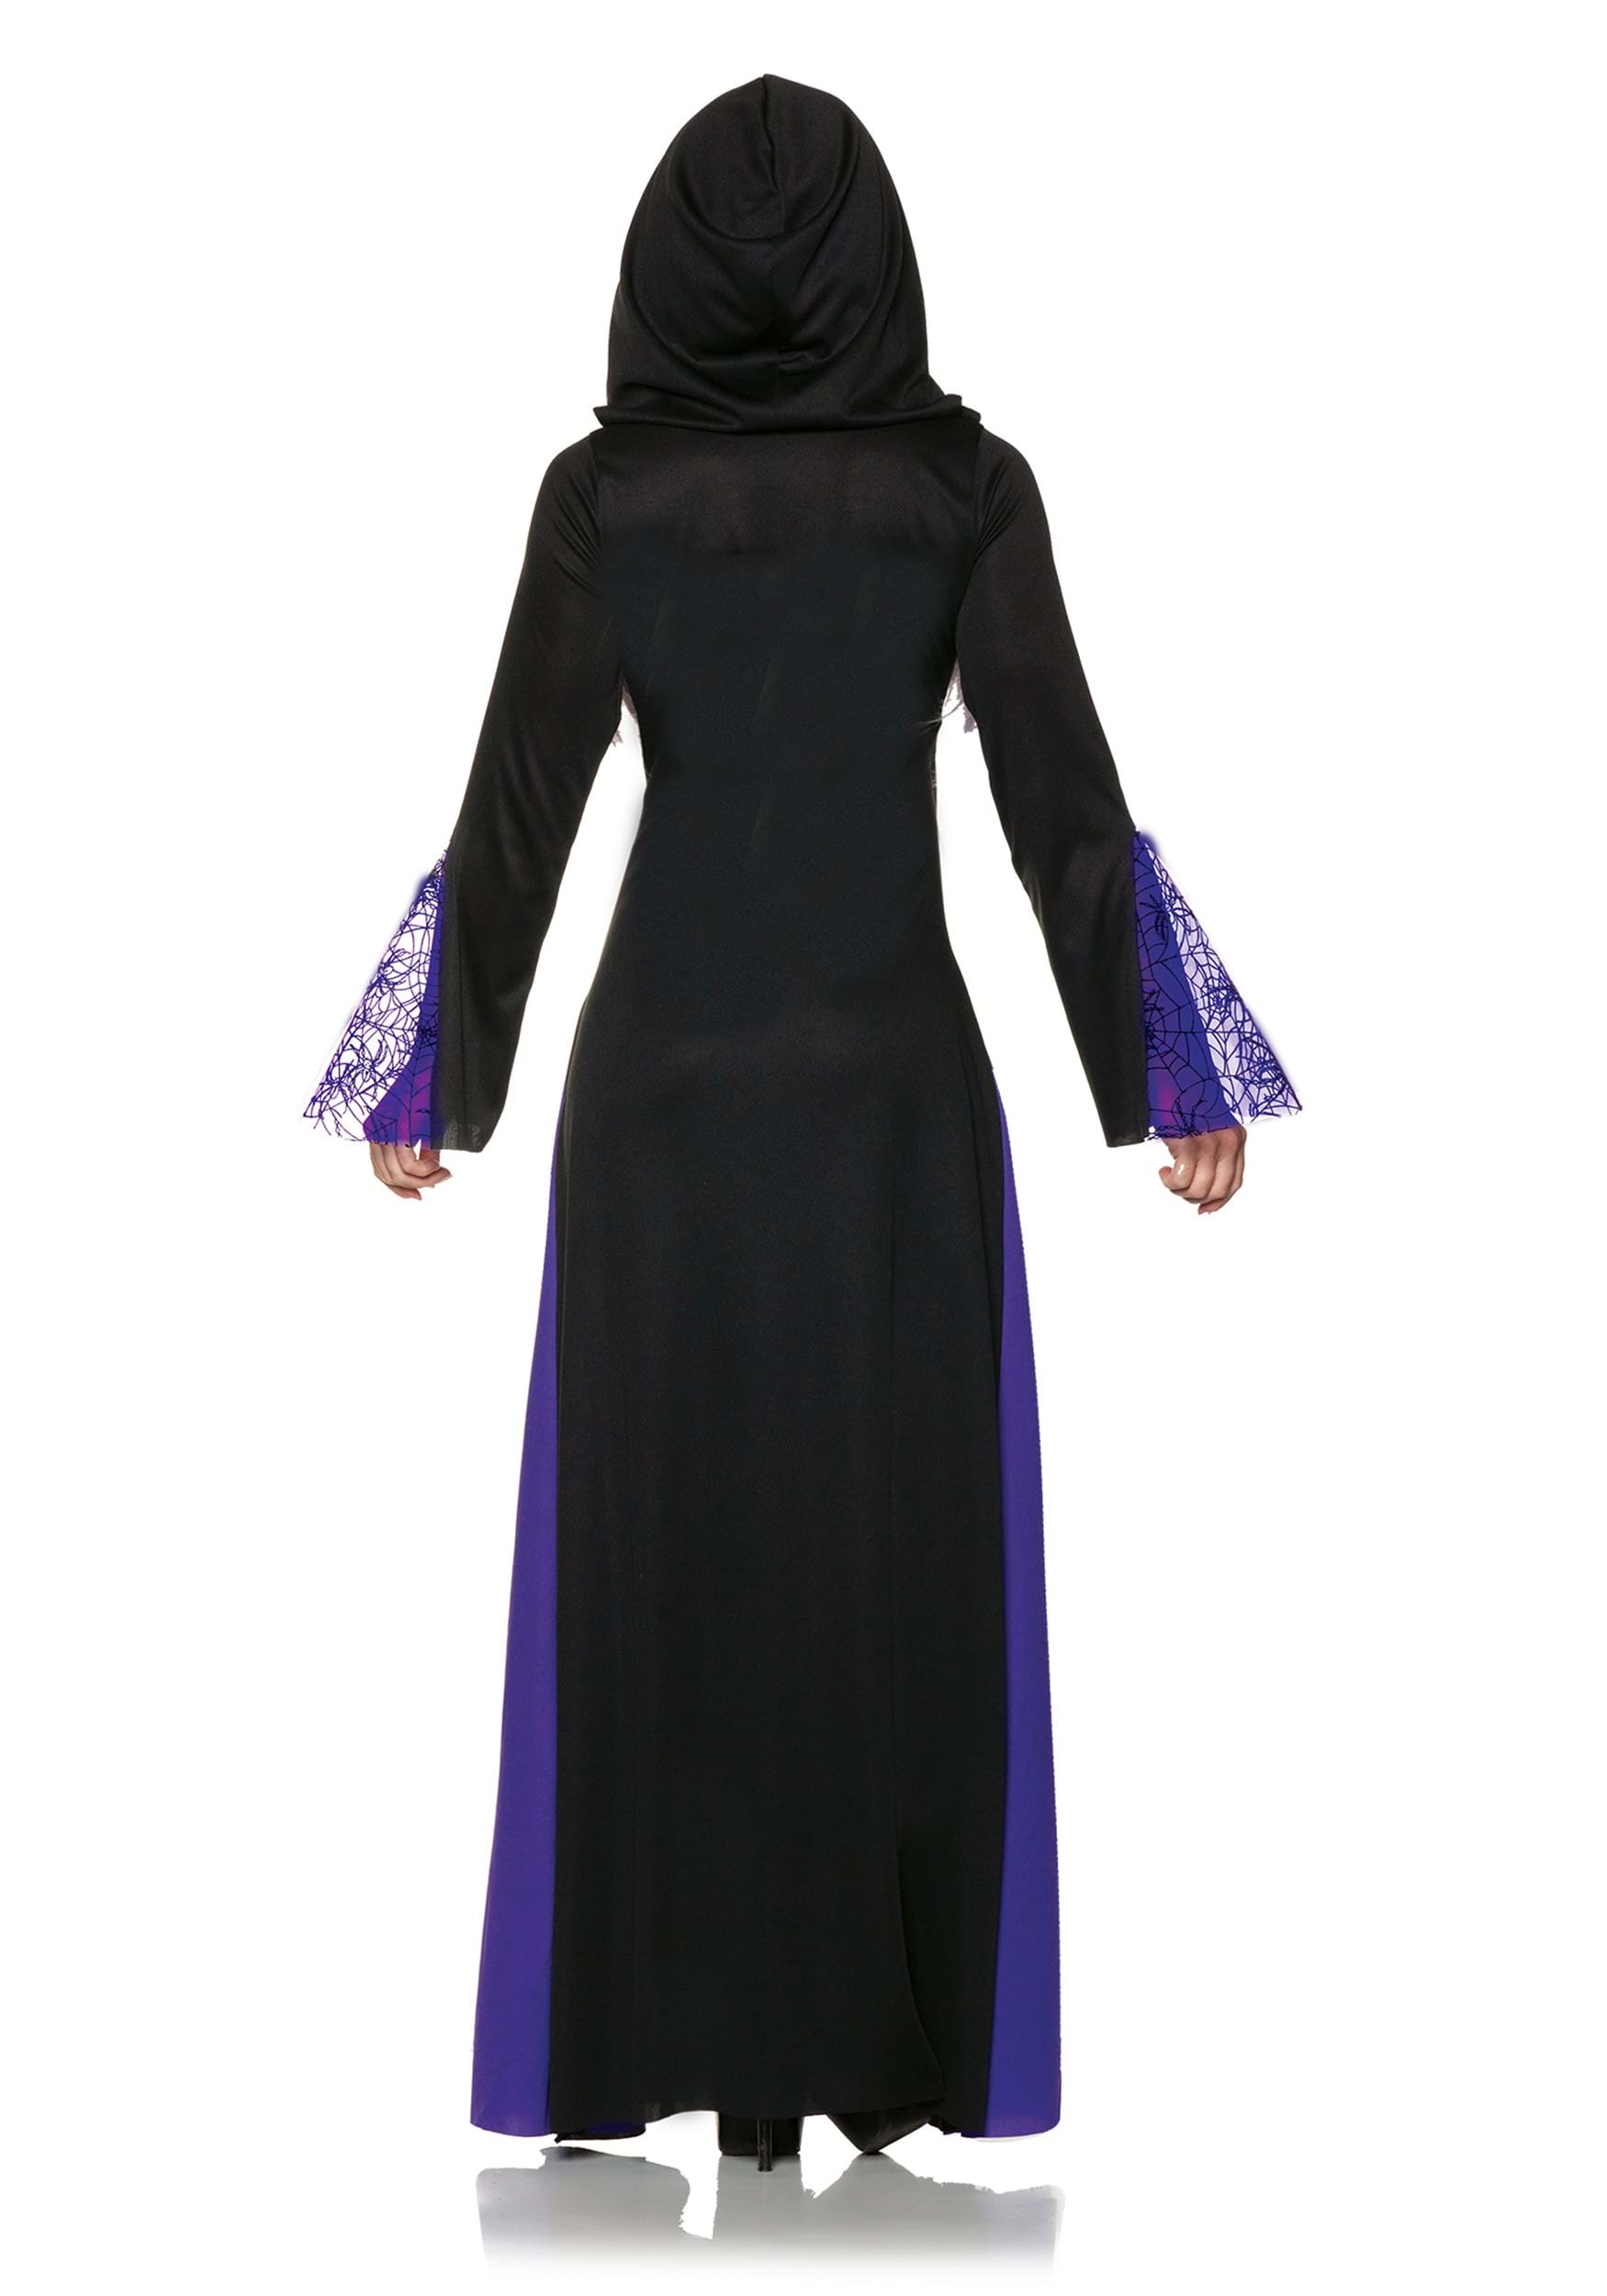 Mystic Witch Women's Adult Costume